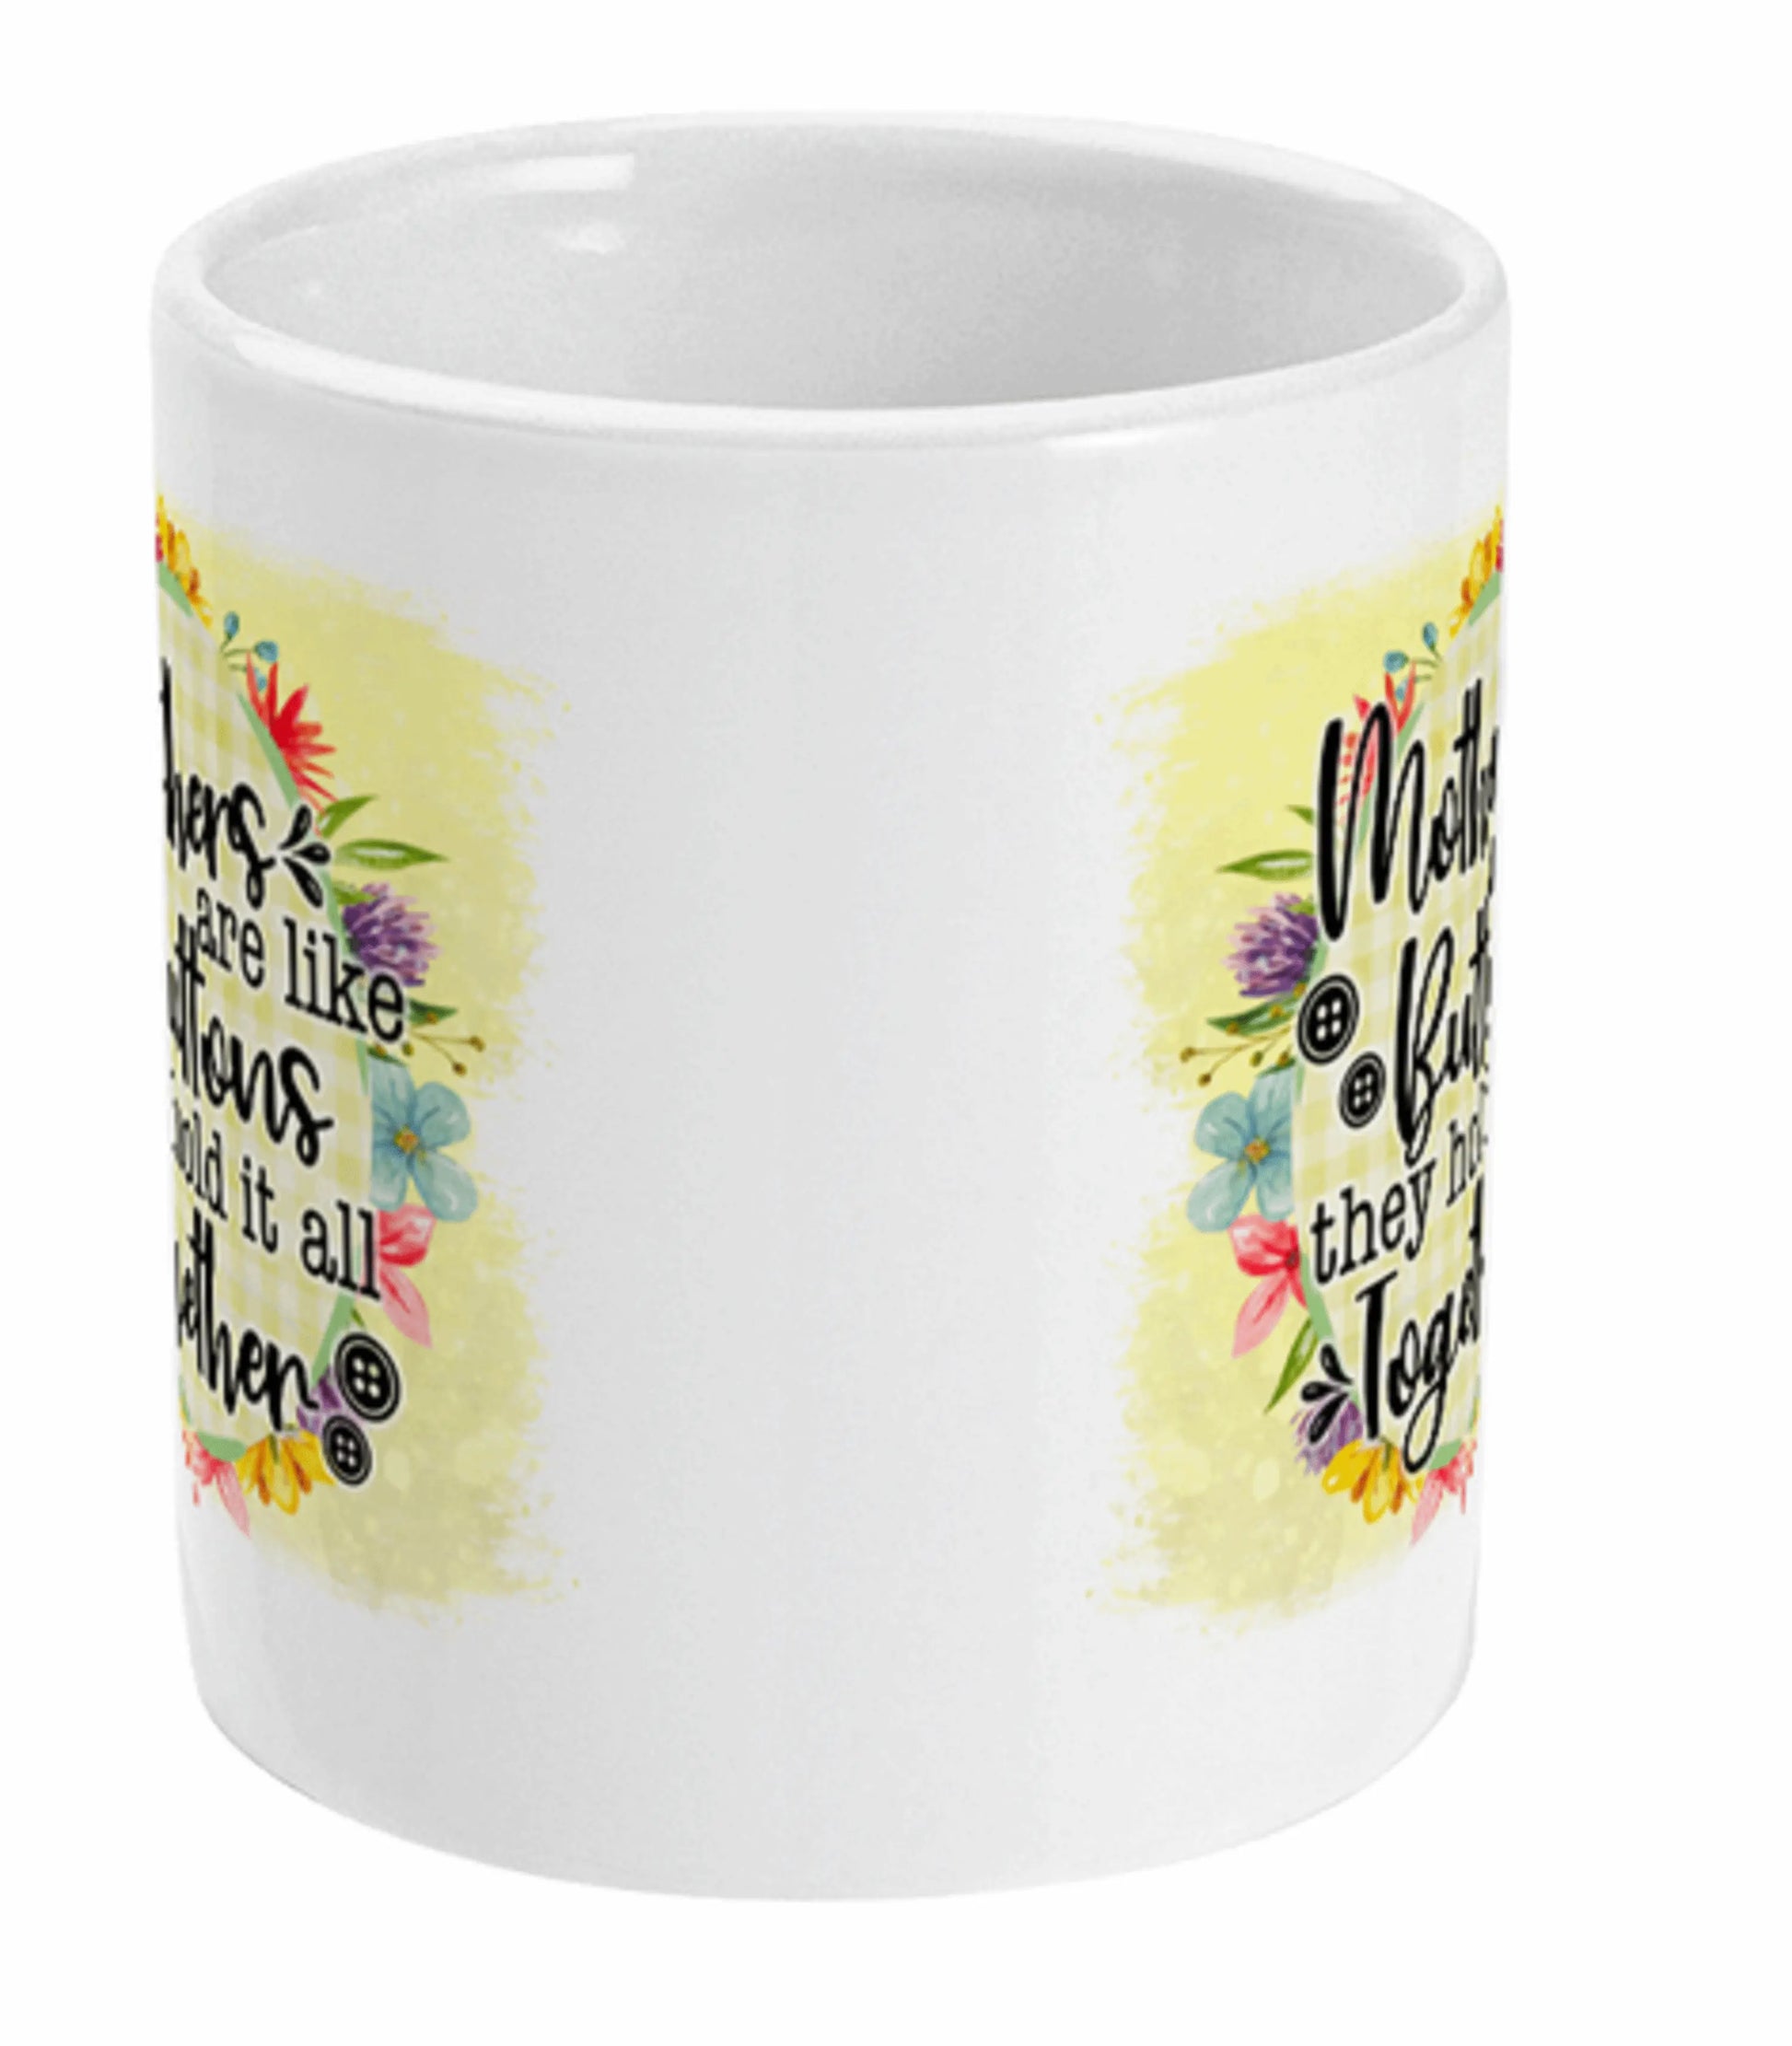  A Mother Is Like Buttons Coffee Mug by Free Spirit Accessories sold by Free Spirit Accessories